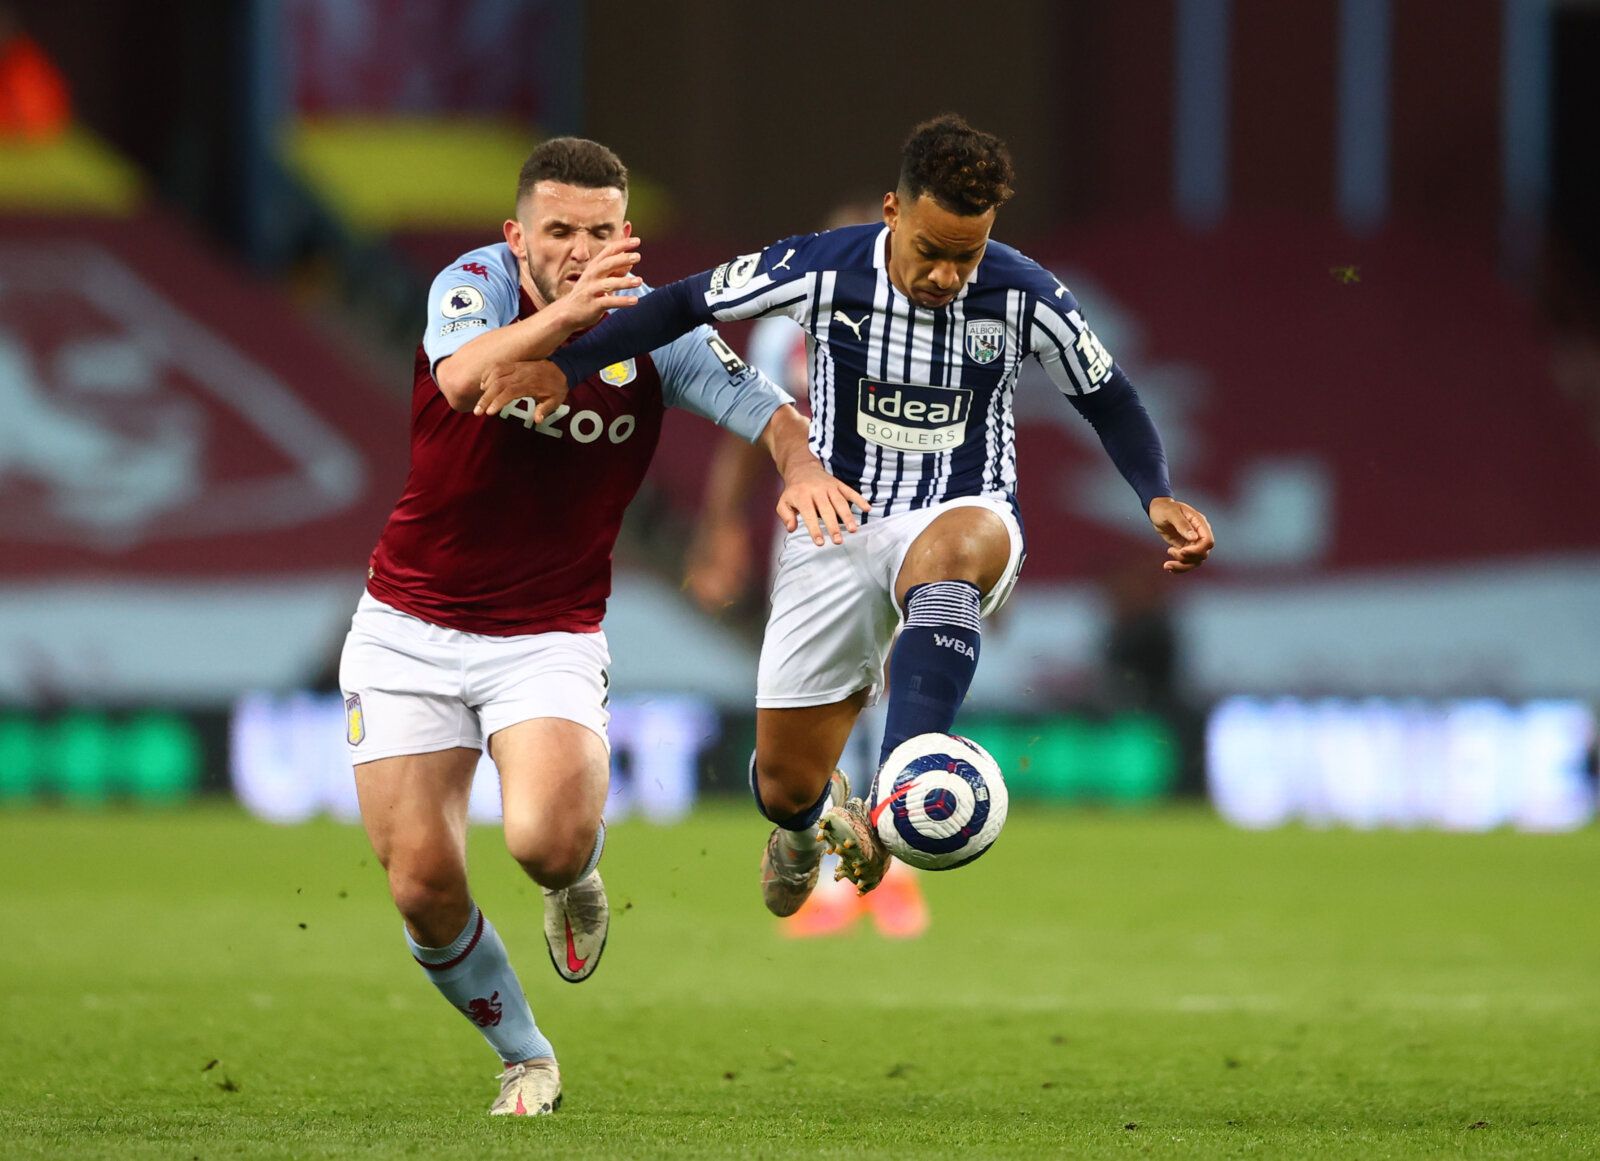 Soccer Football - Premier League - Aston Villa v West Bromwich Albion  - Villa Park, Birmingham, Britain - April 25, 2021 West Bromwich Albion's Matheus Pereira in action with Aston Villa's John McGinn Pool via REUTERS/Michael Steele EDITORIAL USE ONLY. No use with unauthorized audio, video, data, fixture lists, club/league logos or 'live' services. Online in-match use limited to 75 images, no video emulation. No use in betting, games or single club /league/player publications.  Please contact y